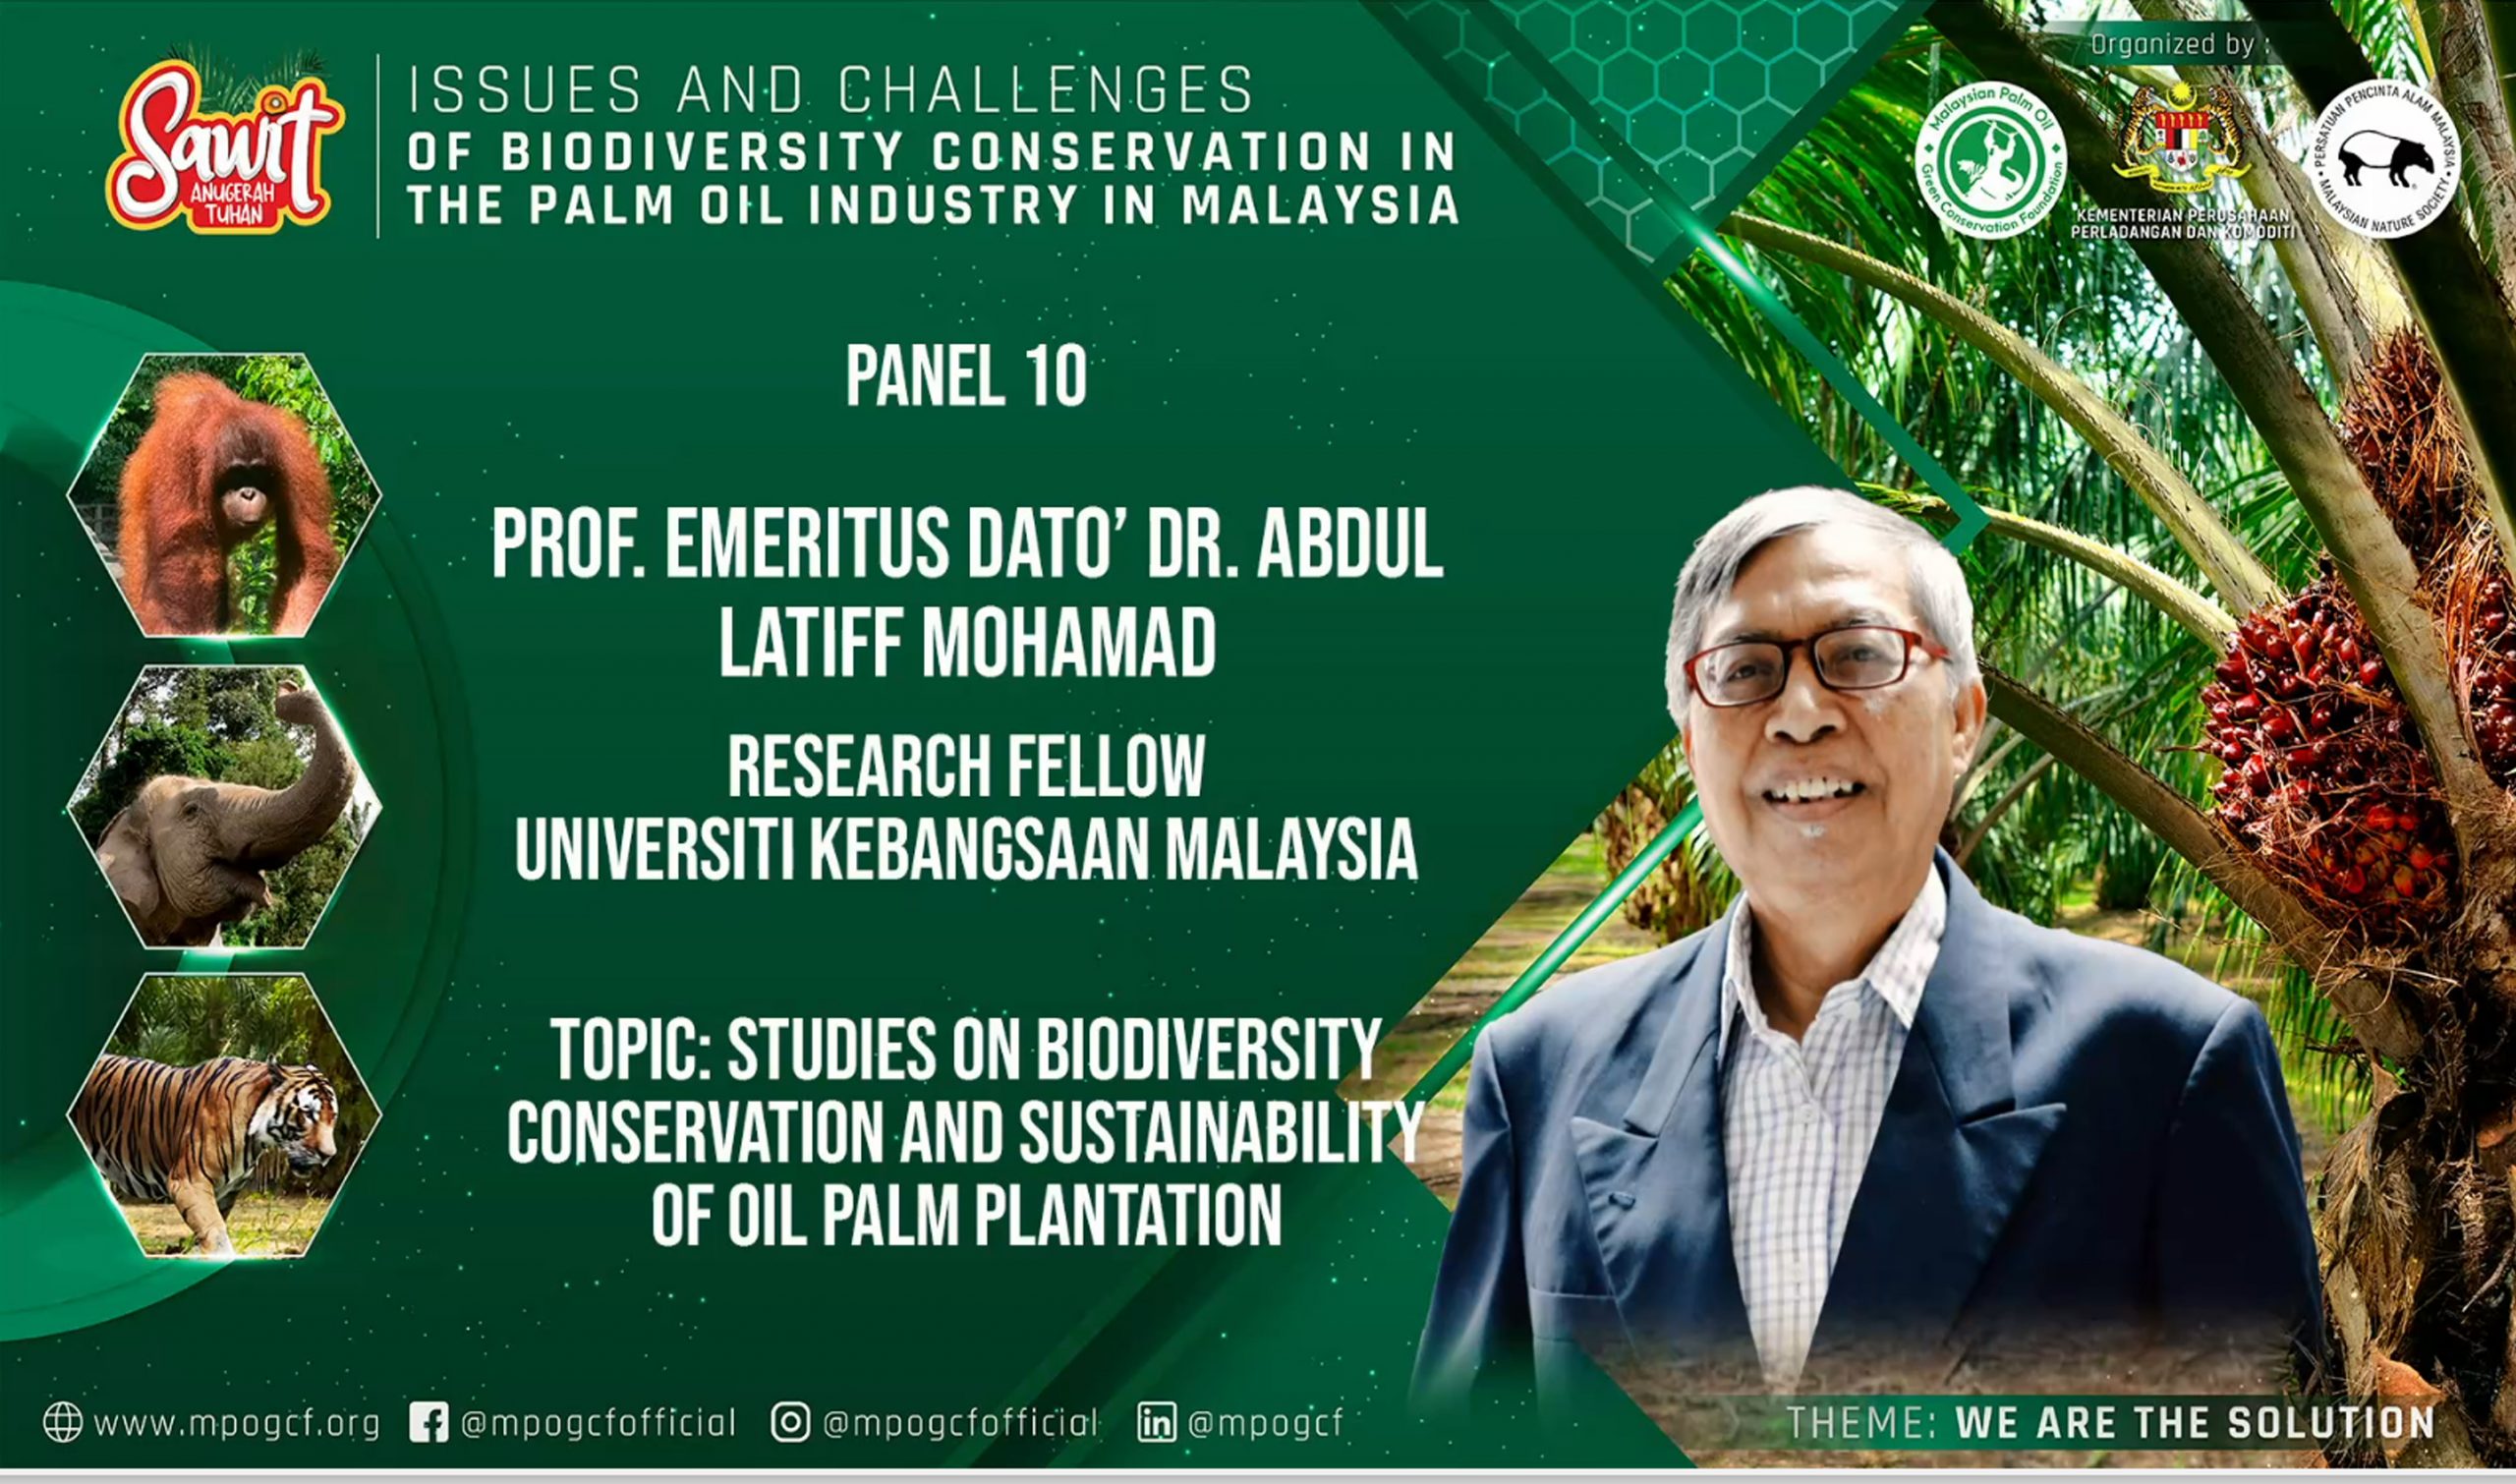 Studies on Biodiversity Conservation and Sustainability of Oil Palm Plantation by Prof Emeritus Dato Dr Abdul Latiff Mohamad